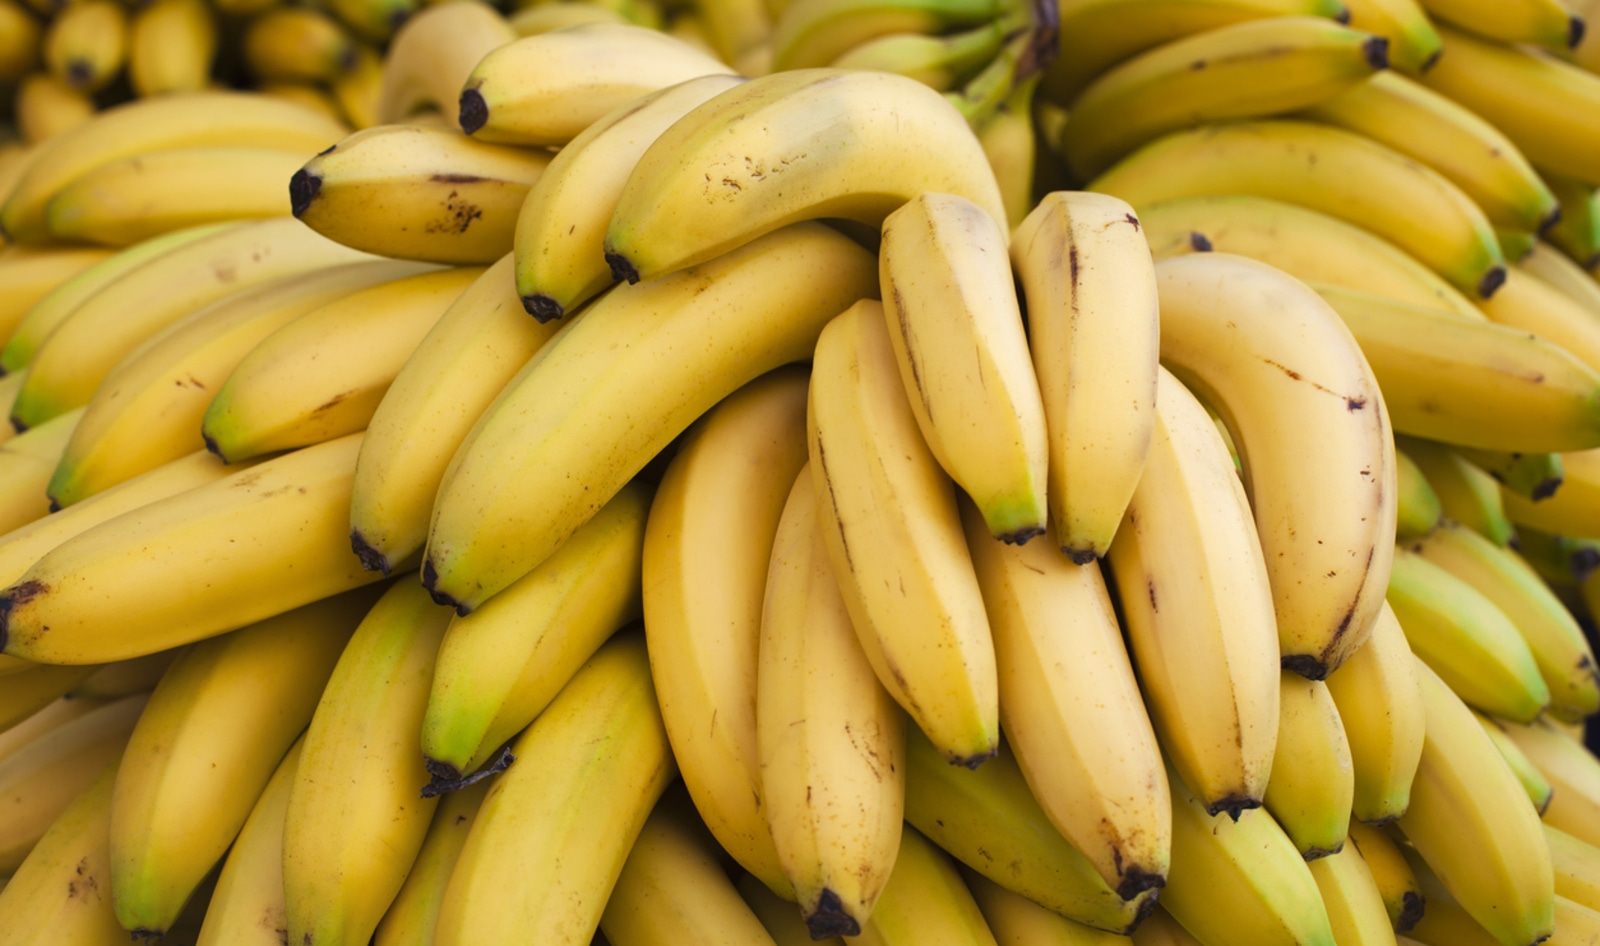 Trader Joe's Just Raised Banana Prices for the First Time in 20 Years, and Climate Change Might Be to Blame